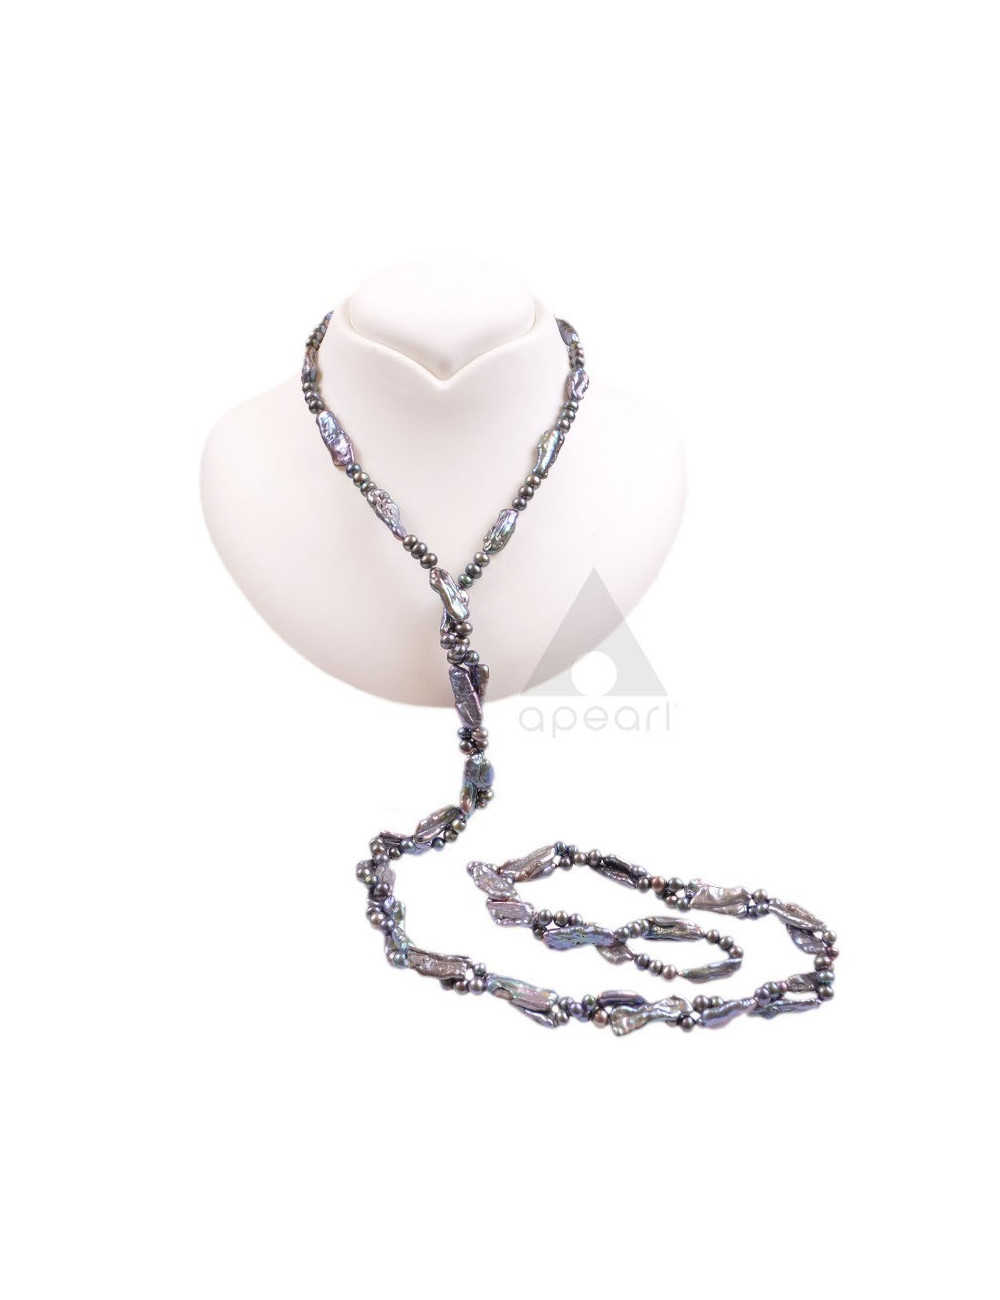 Striking string of dark baroque freshwater pearls with two different types of shapes NGLUDMIX